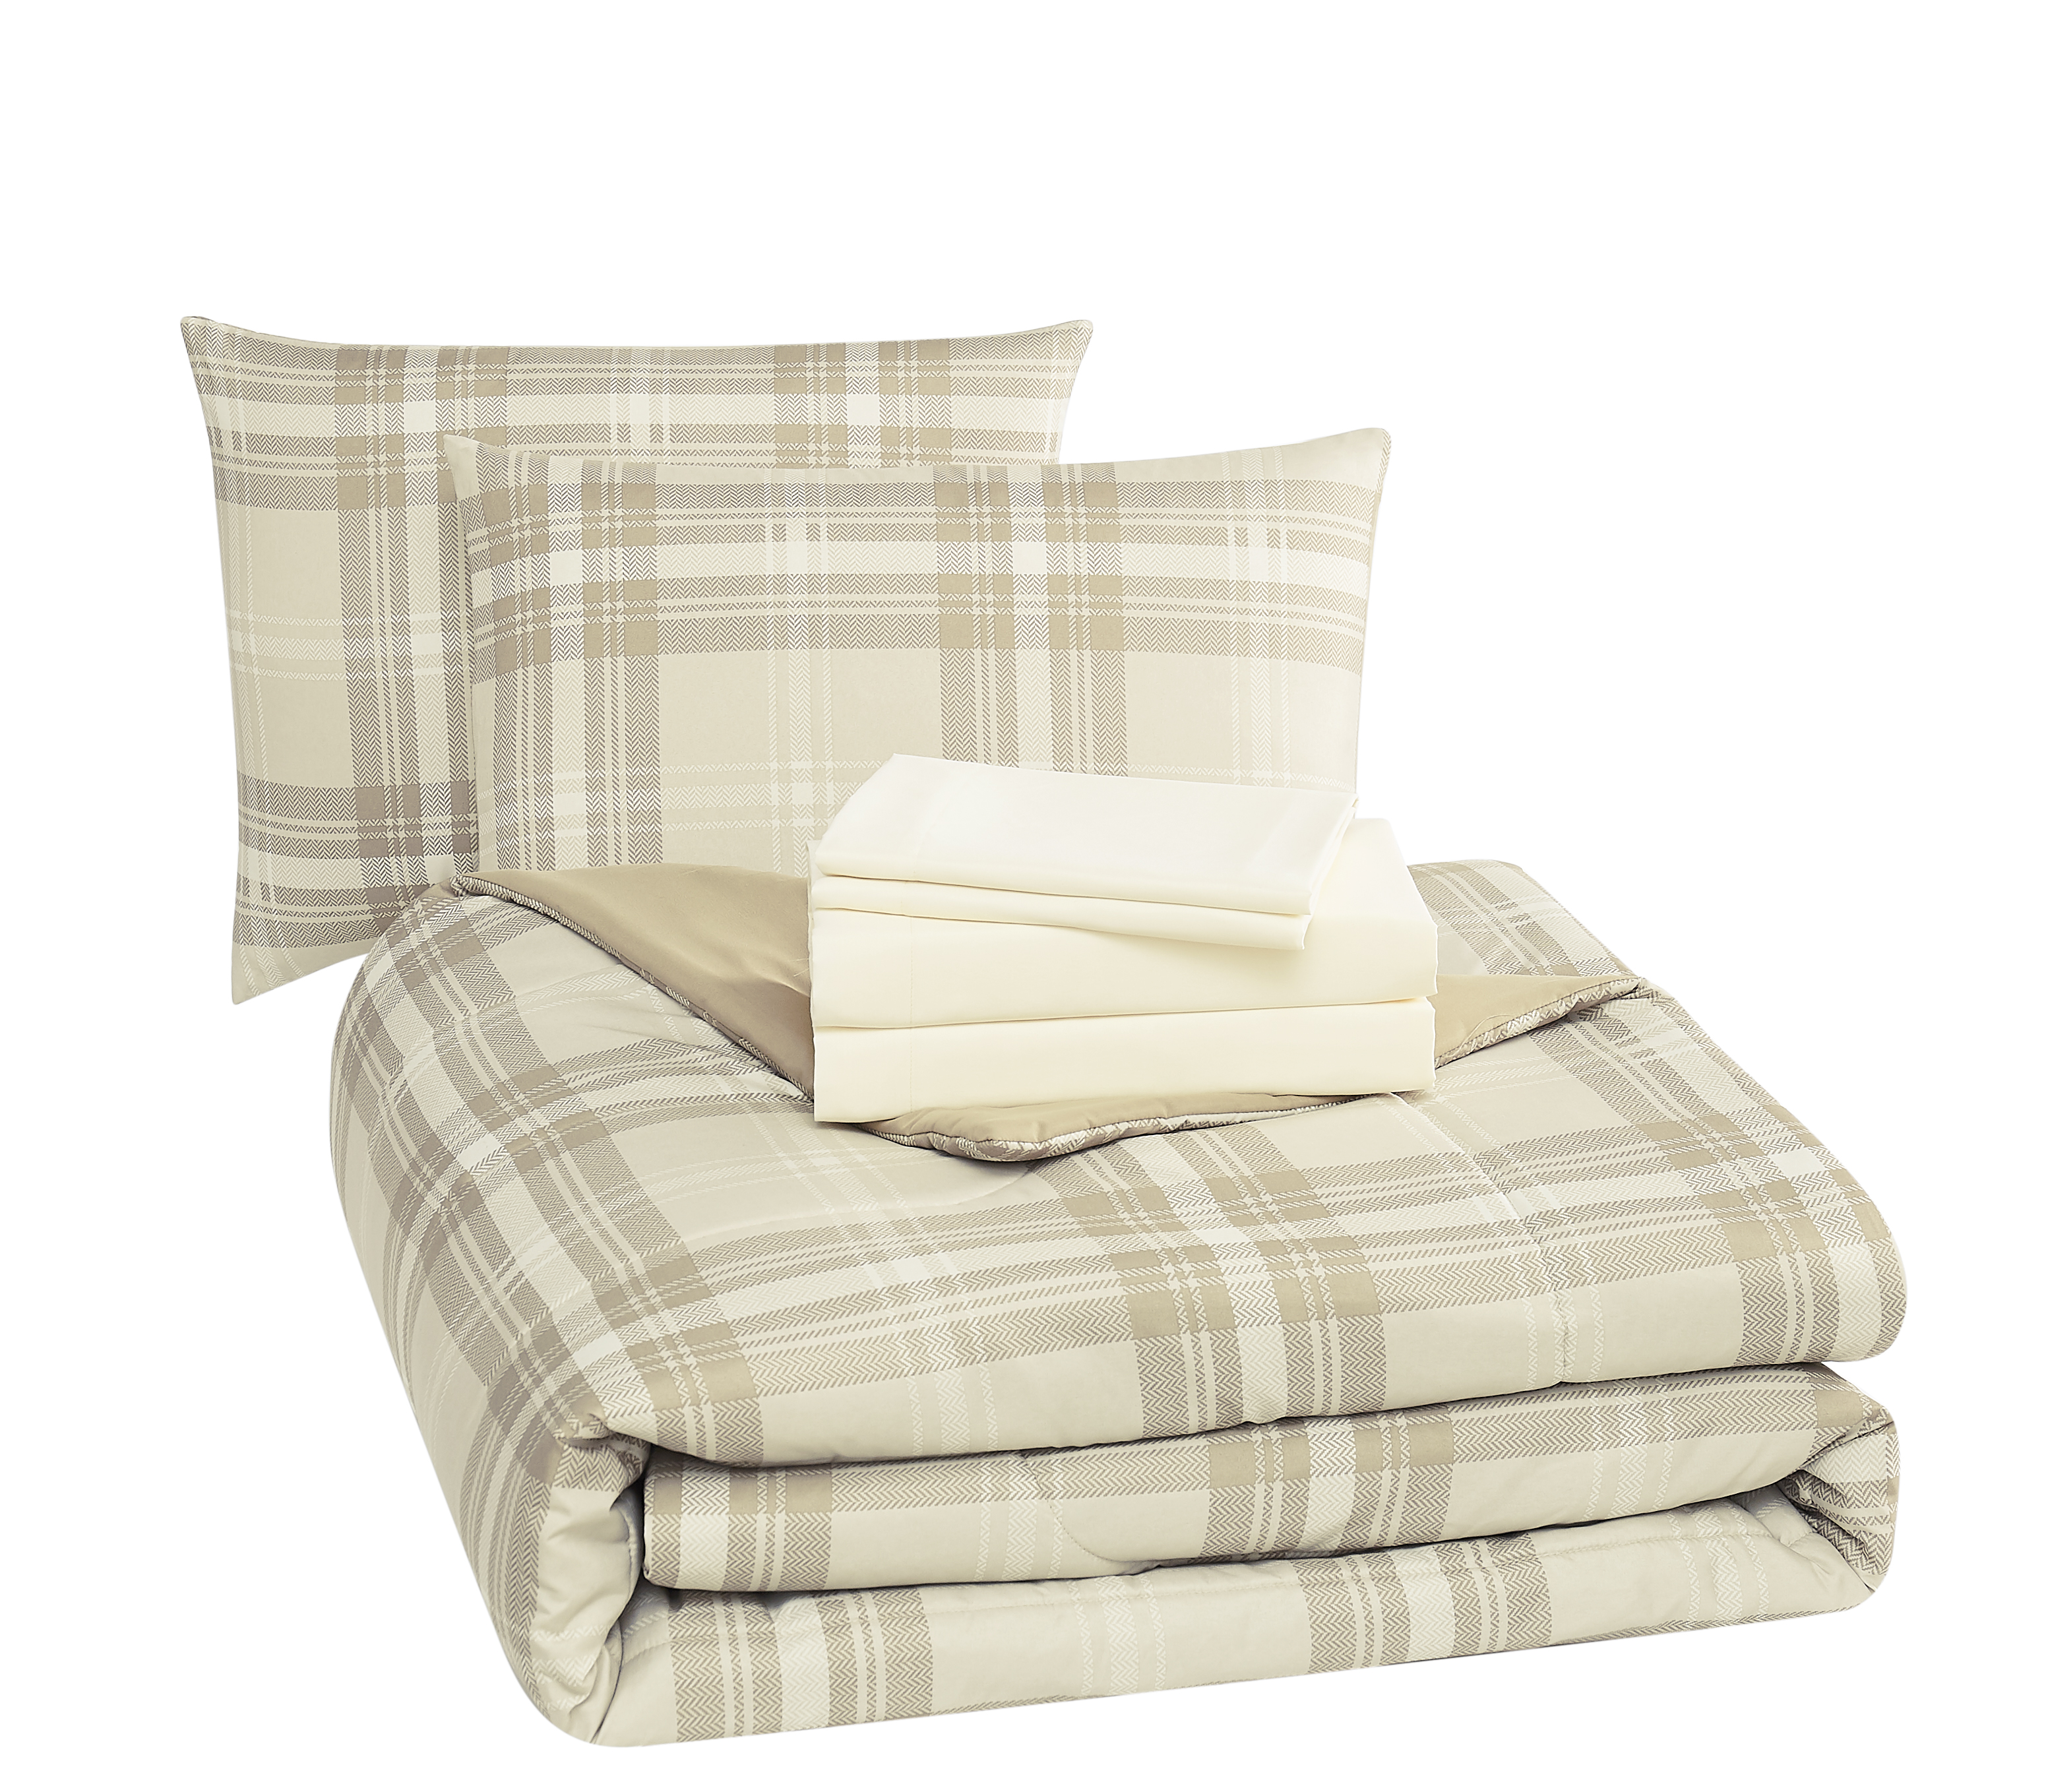 Mainstays Beige Plaid Reversible 7-Piece Bed in a Bag Comforter Set with Sheets, King - image 2 of 7